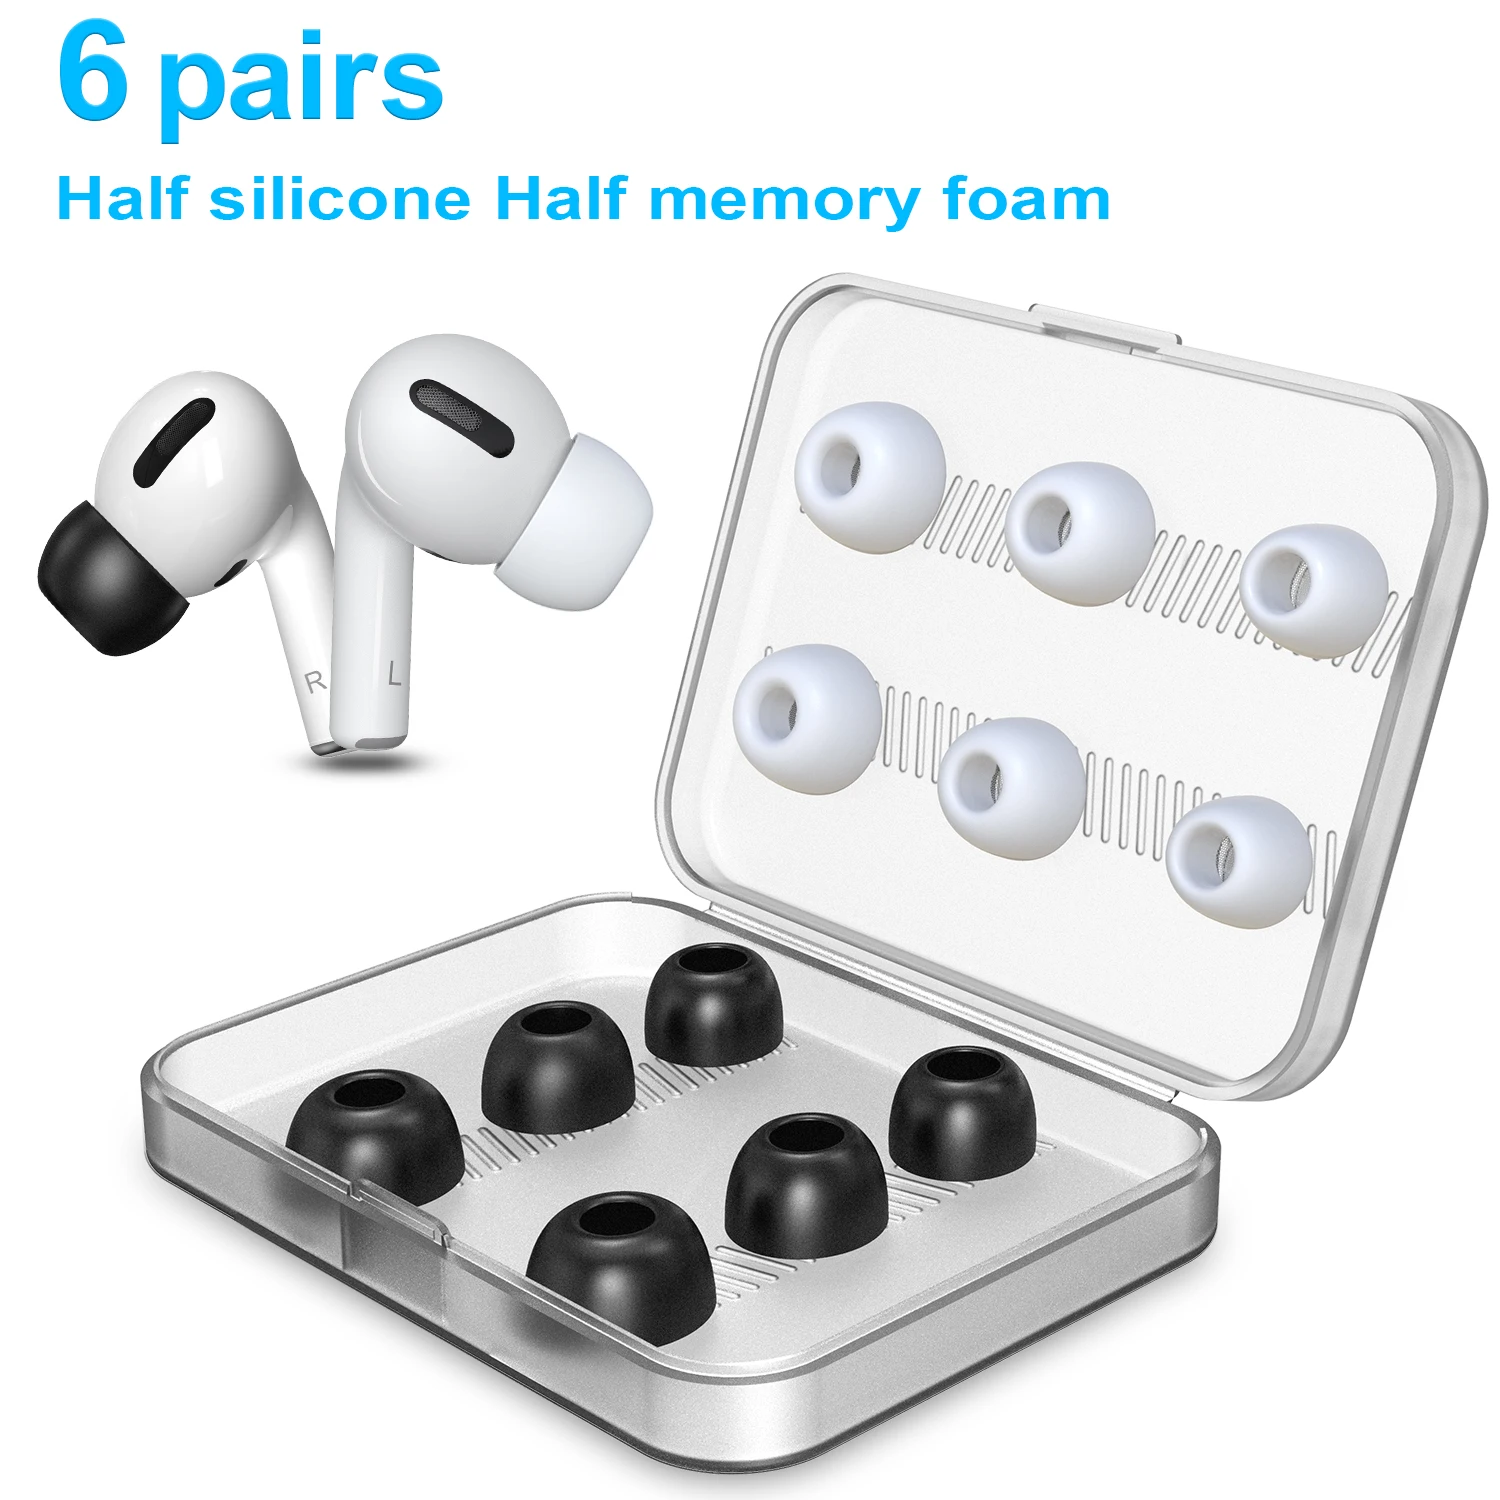 

New Bee 6 Pairs Tws Earbuds Earplug Earphones Ear Tips Silicone Memory Foam Eartip for Airpods Pro